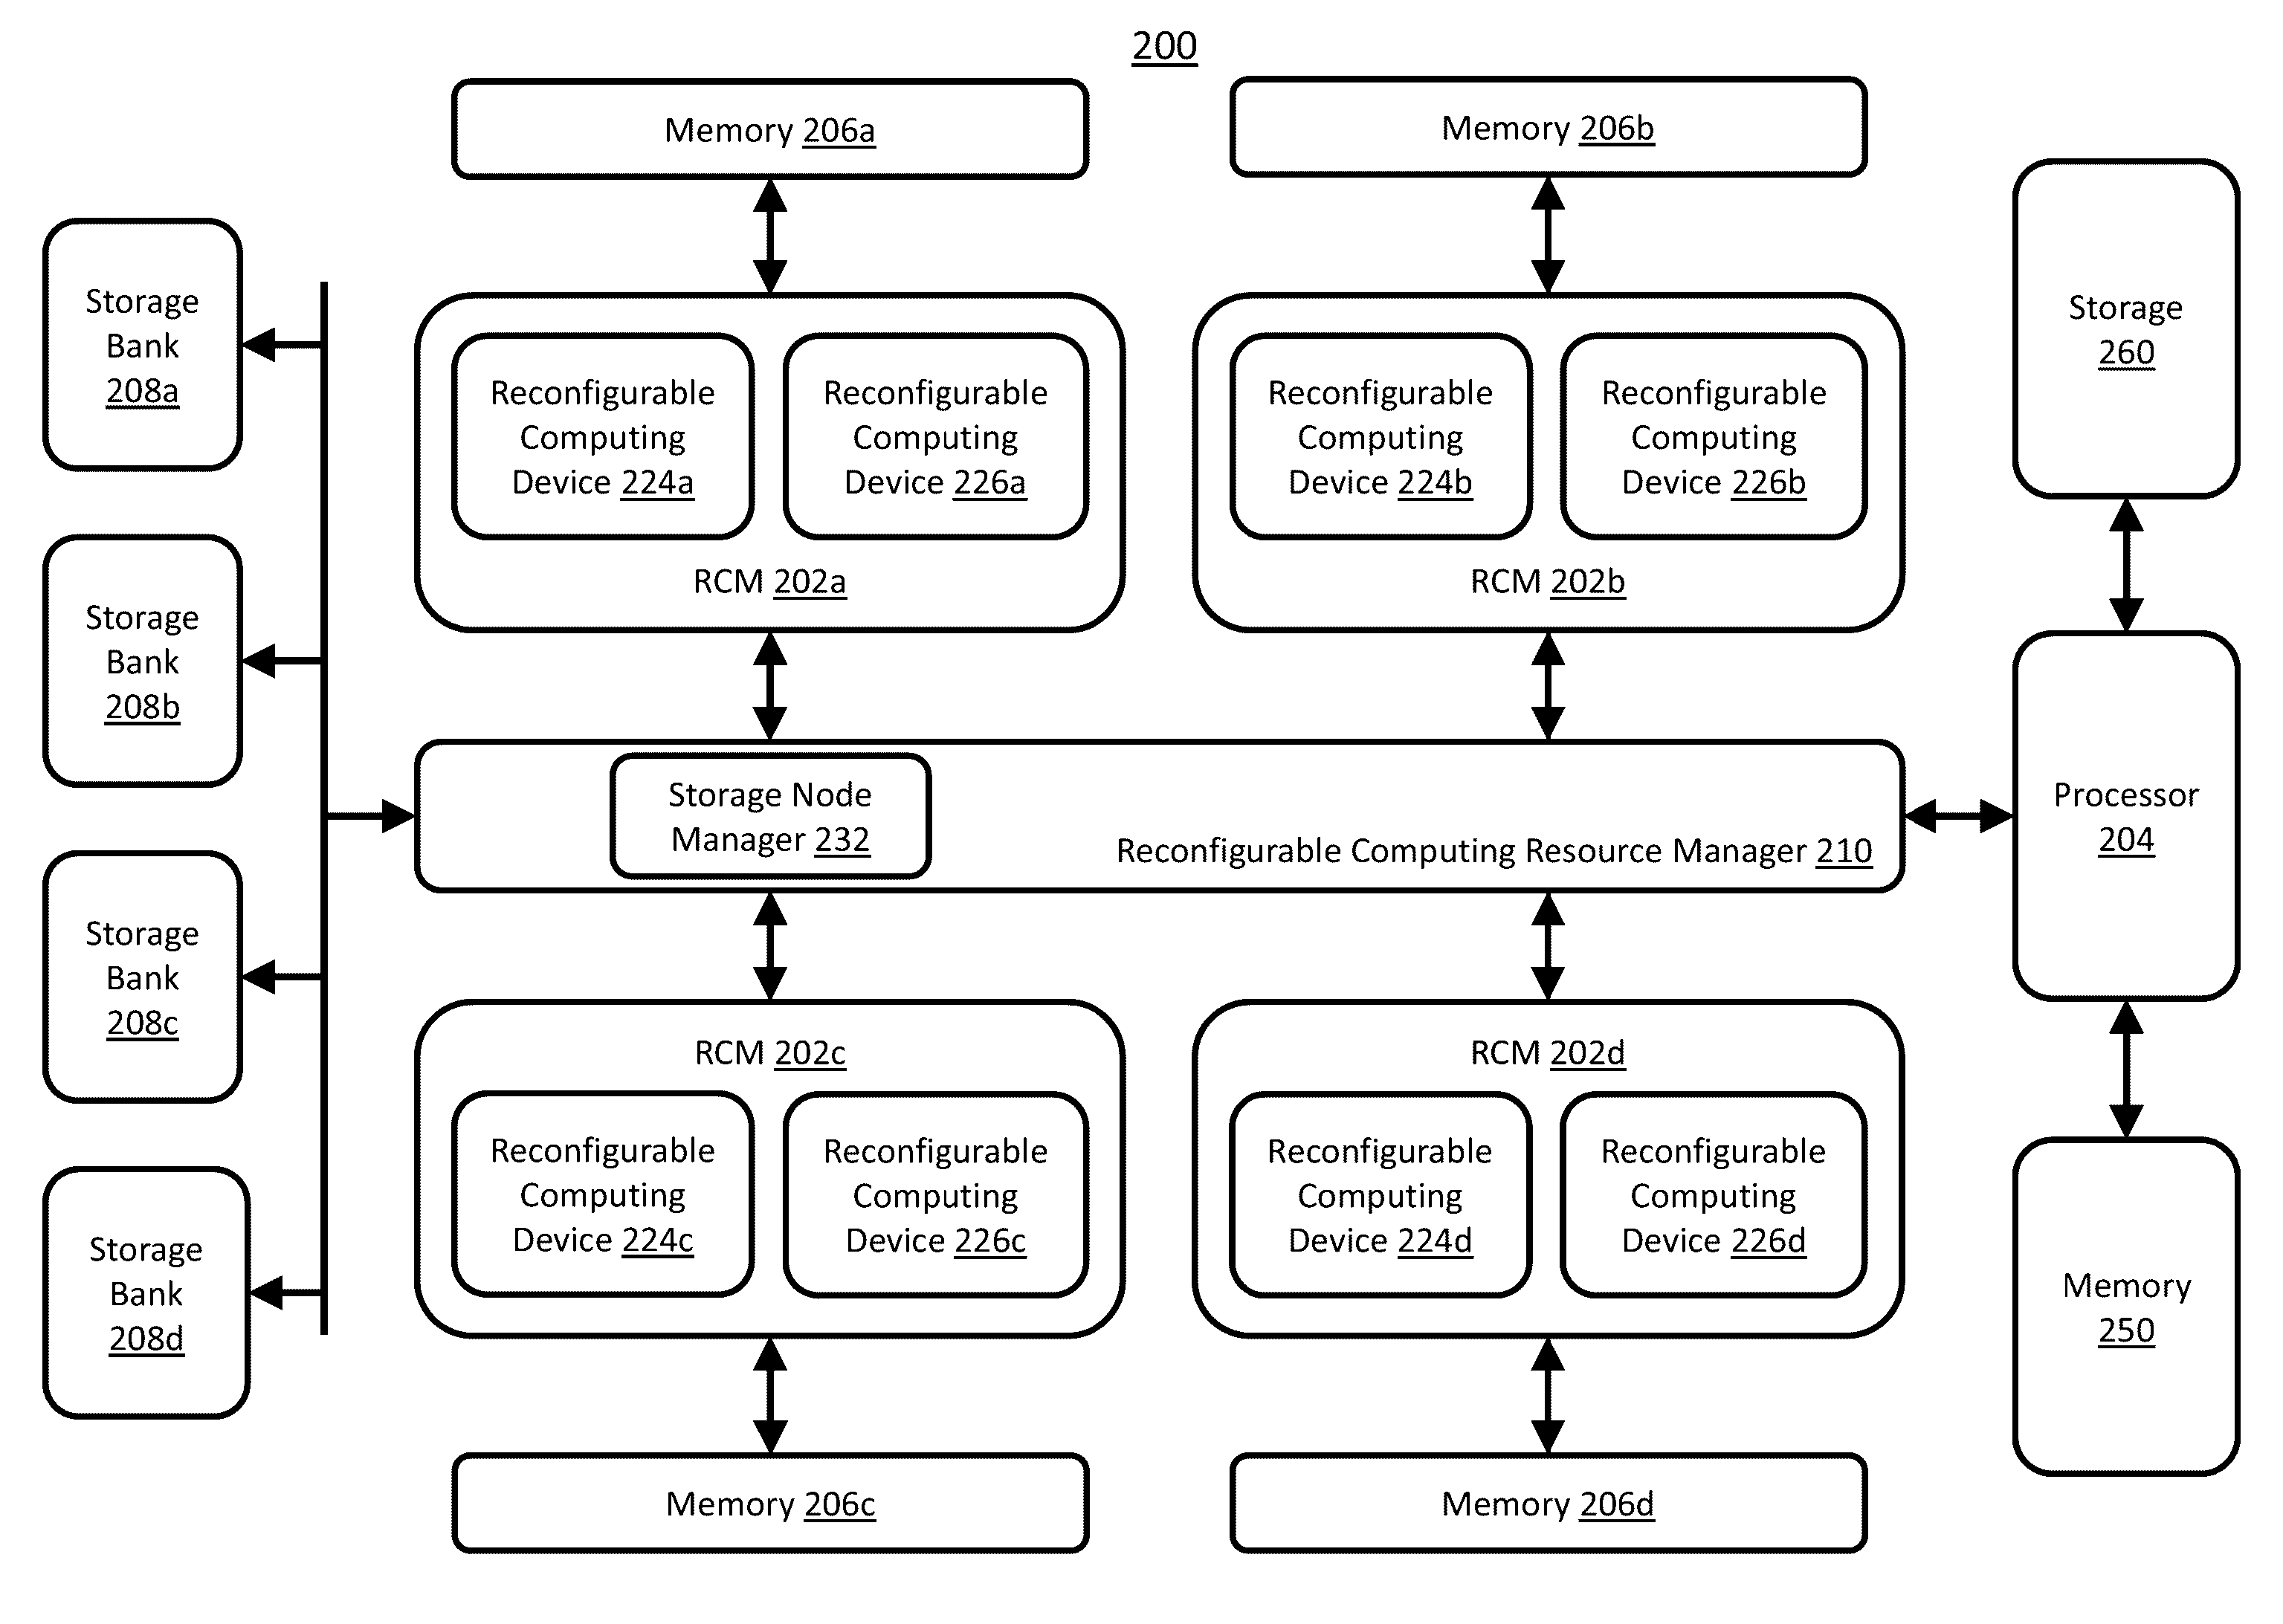 Systems and methods for performing primitive tasks using specialized processors